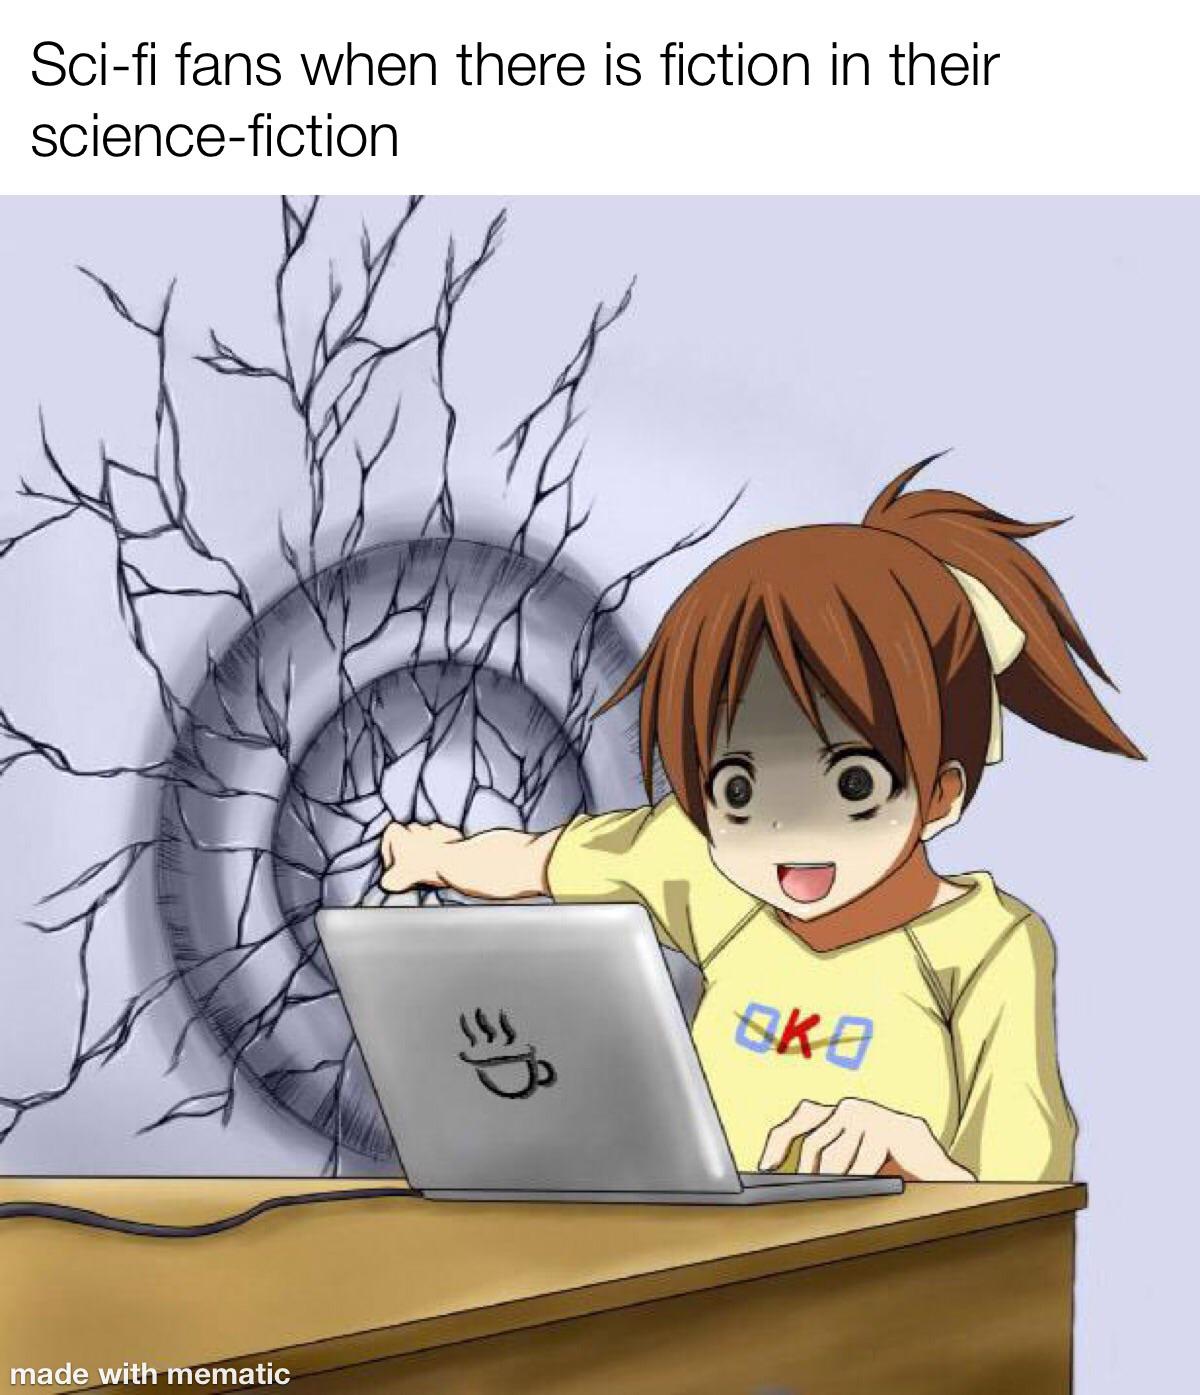 dank memes - Internet meme - Scifi fans when there is fiction in their sciencefiction made with mematic B Oko